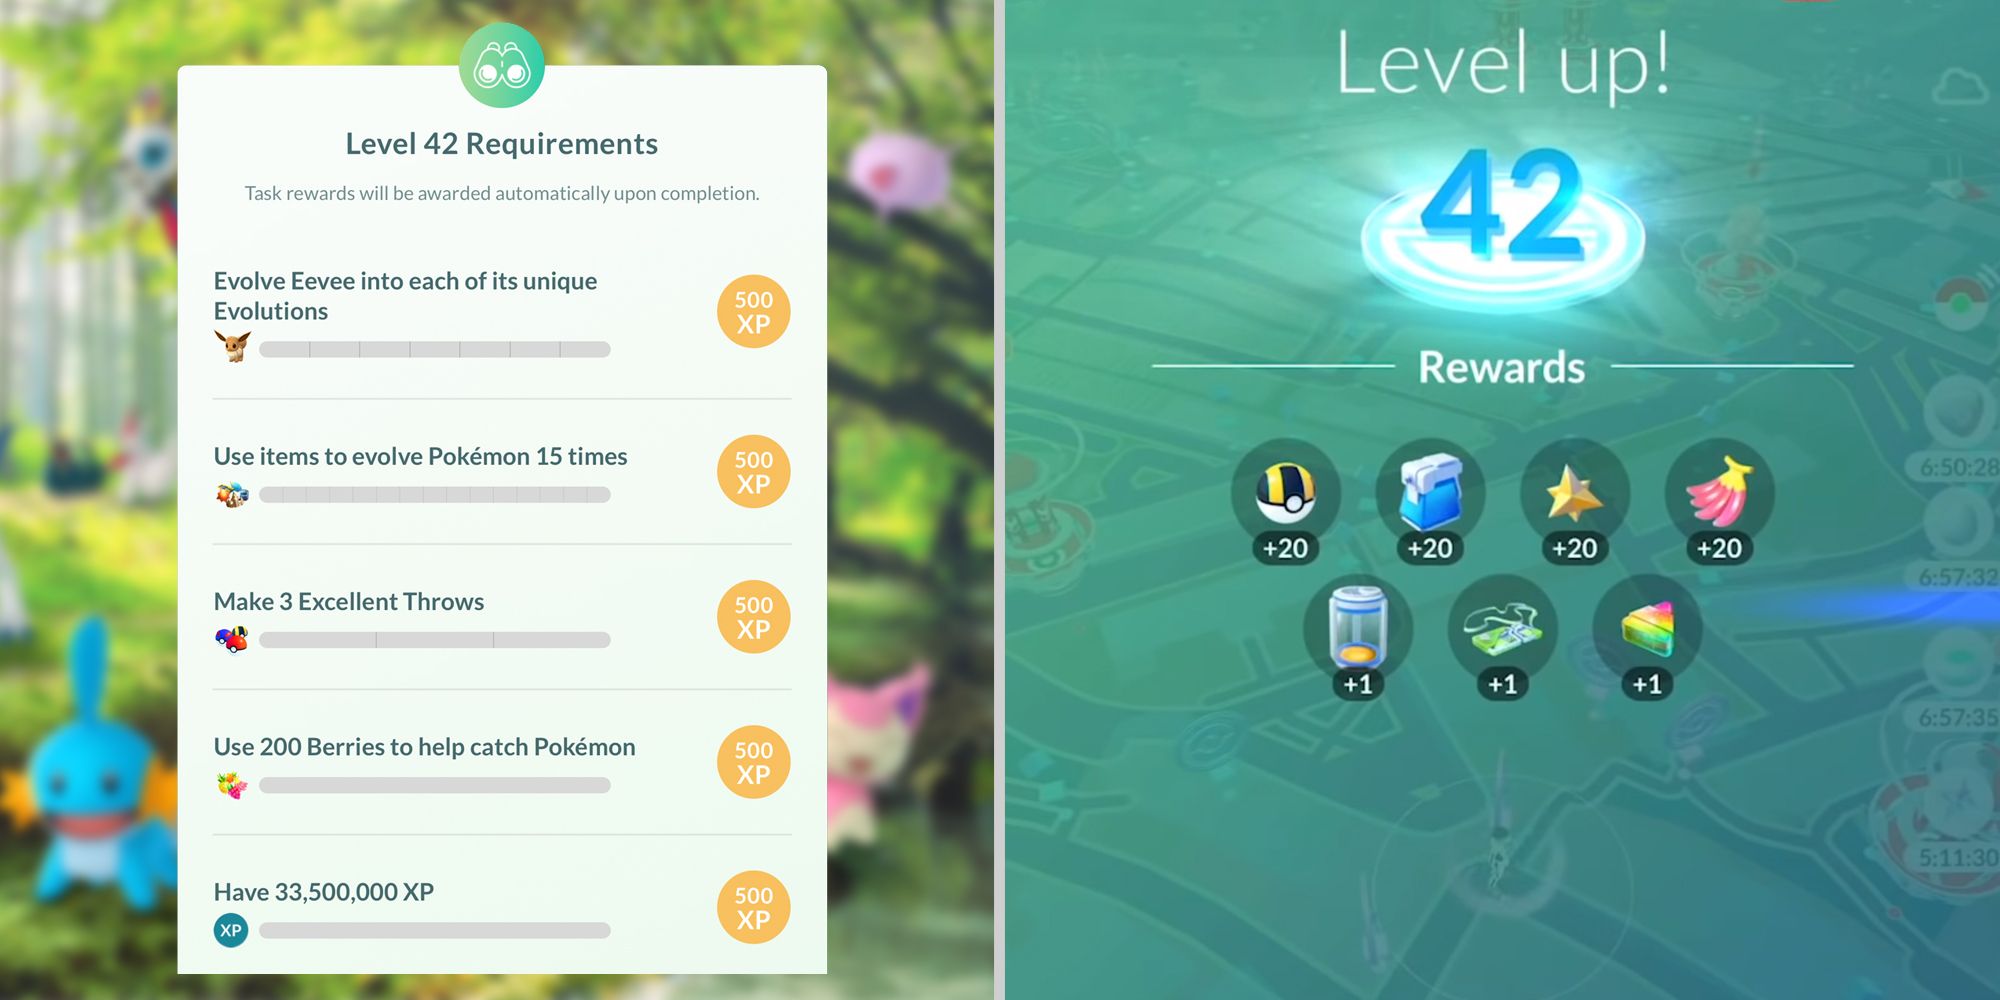 Requirements and rewards for level 42 in Pokemon Go